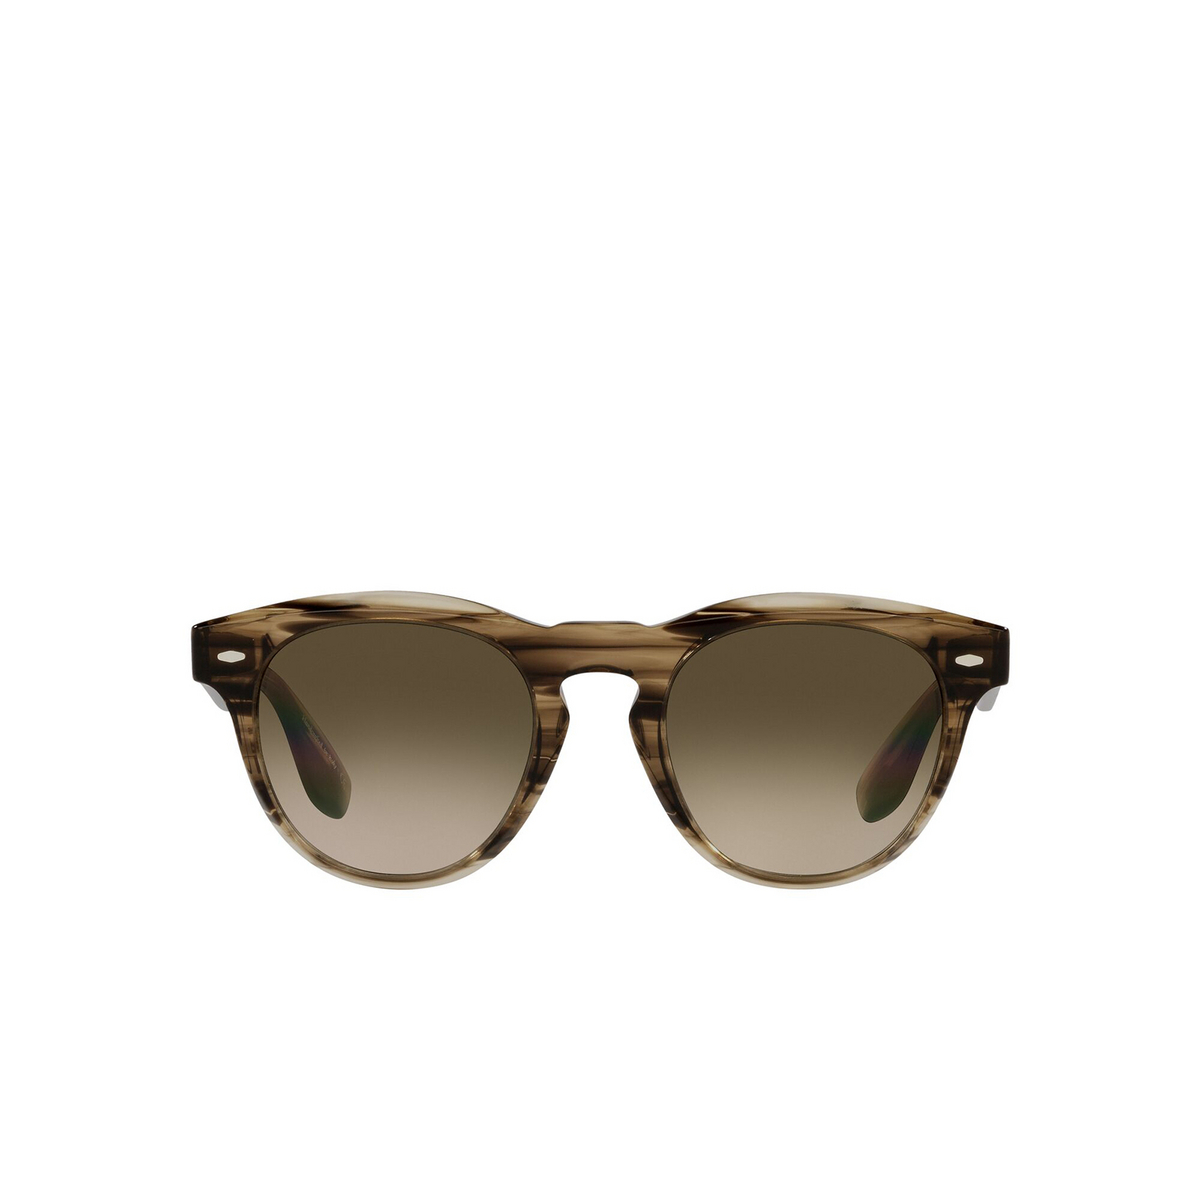 Oliver Peoples NINO Sunglasses 171985 Olive Smoke - front view